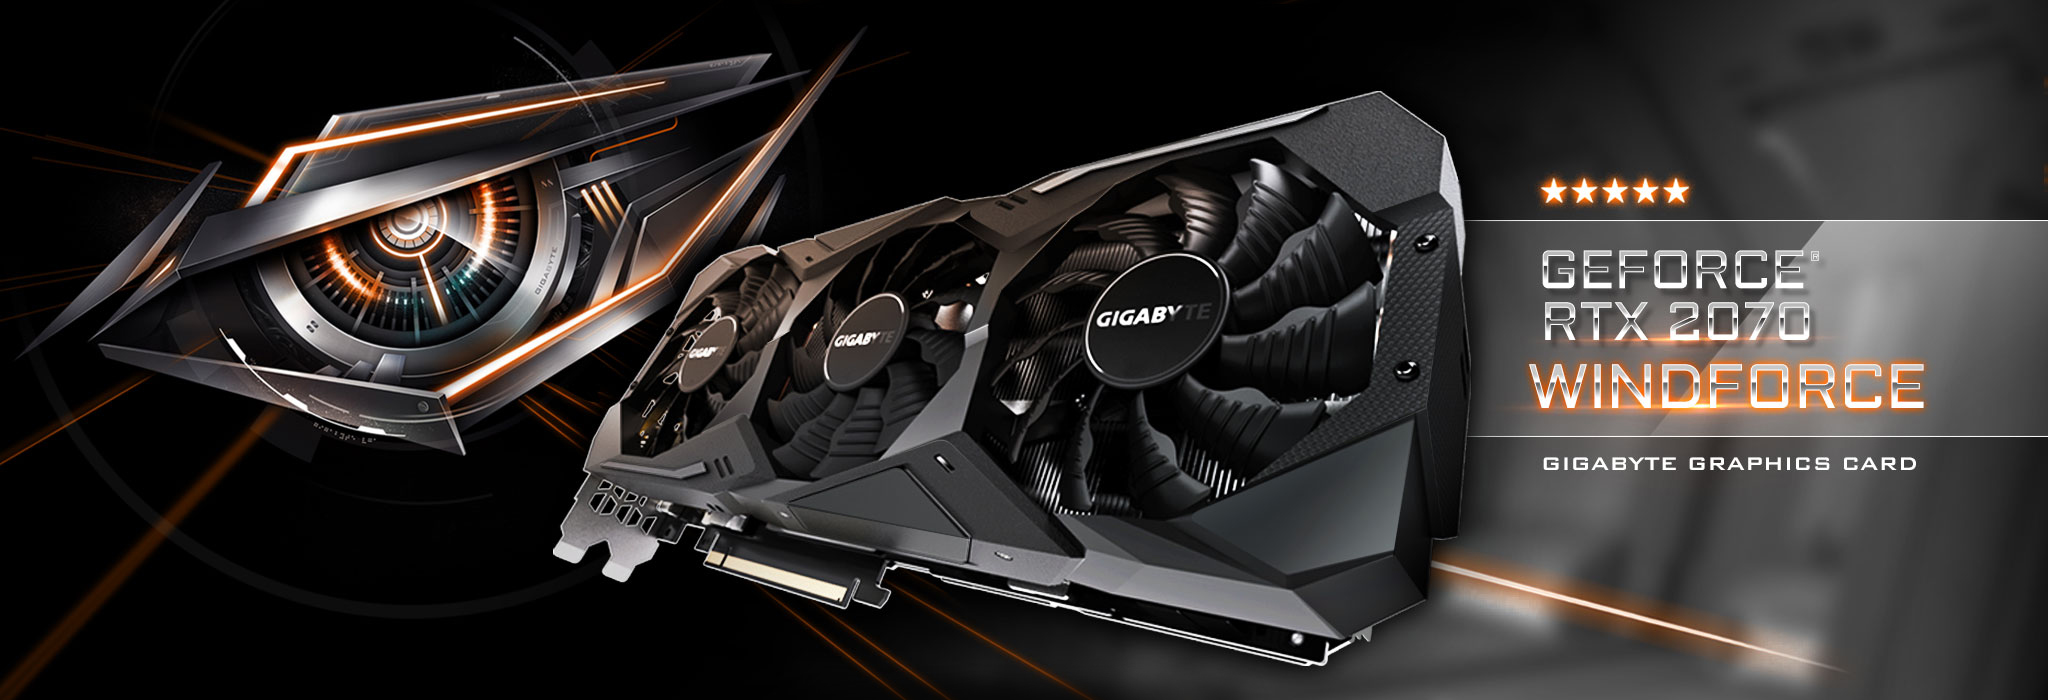 GIGABYTE GEFROCE RTX 2070 WINDFORCE GRAPHICS CARD facing up slightly to the left with the AORUS eye graphic in the background